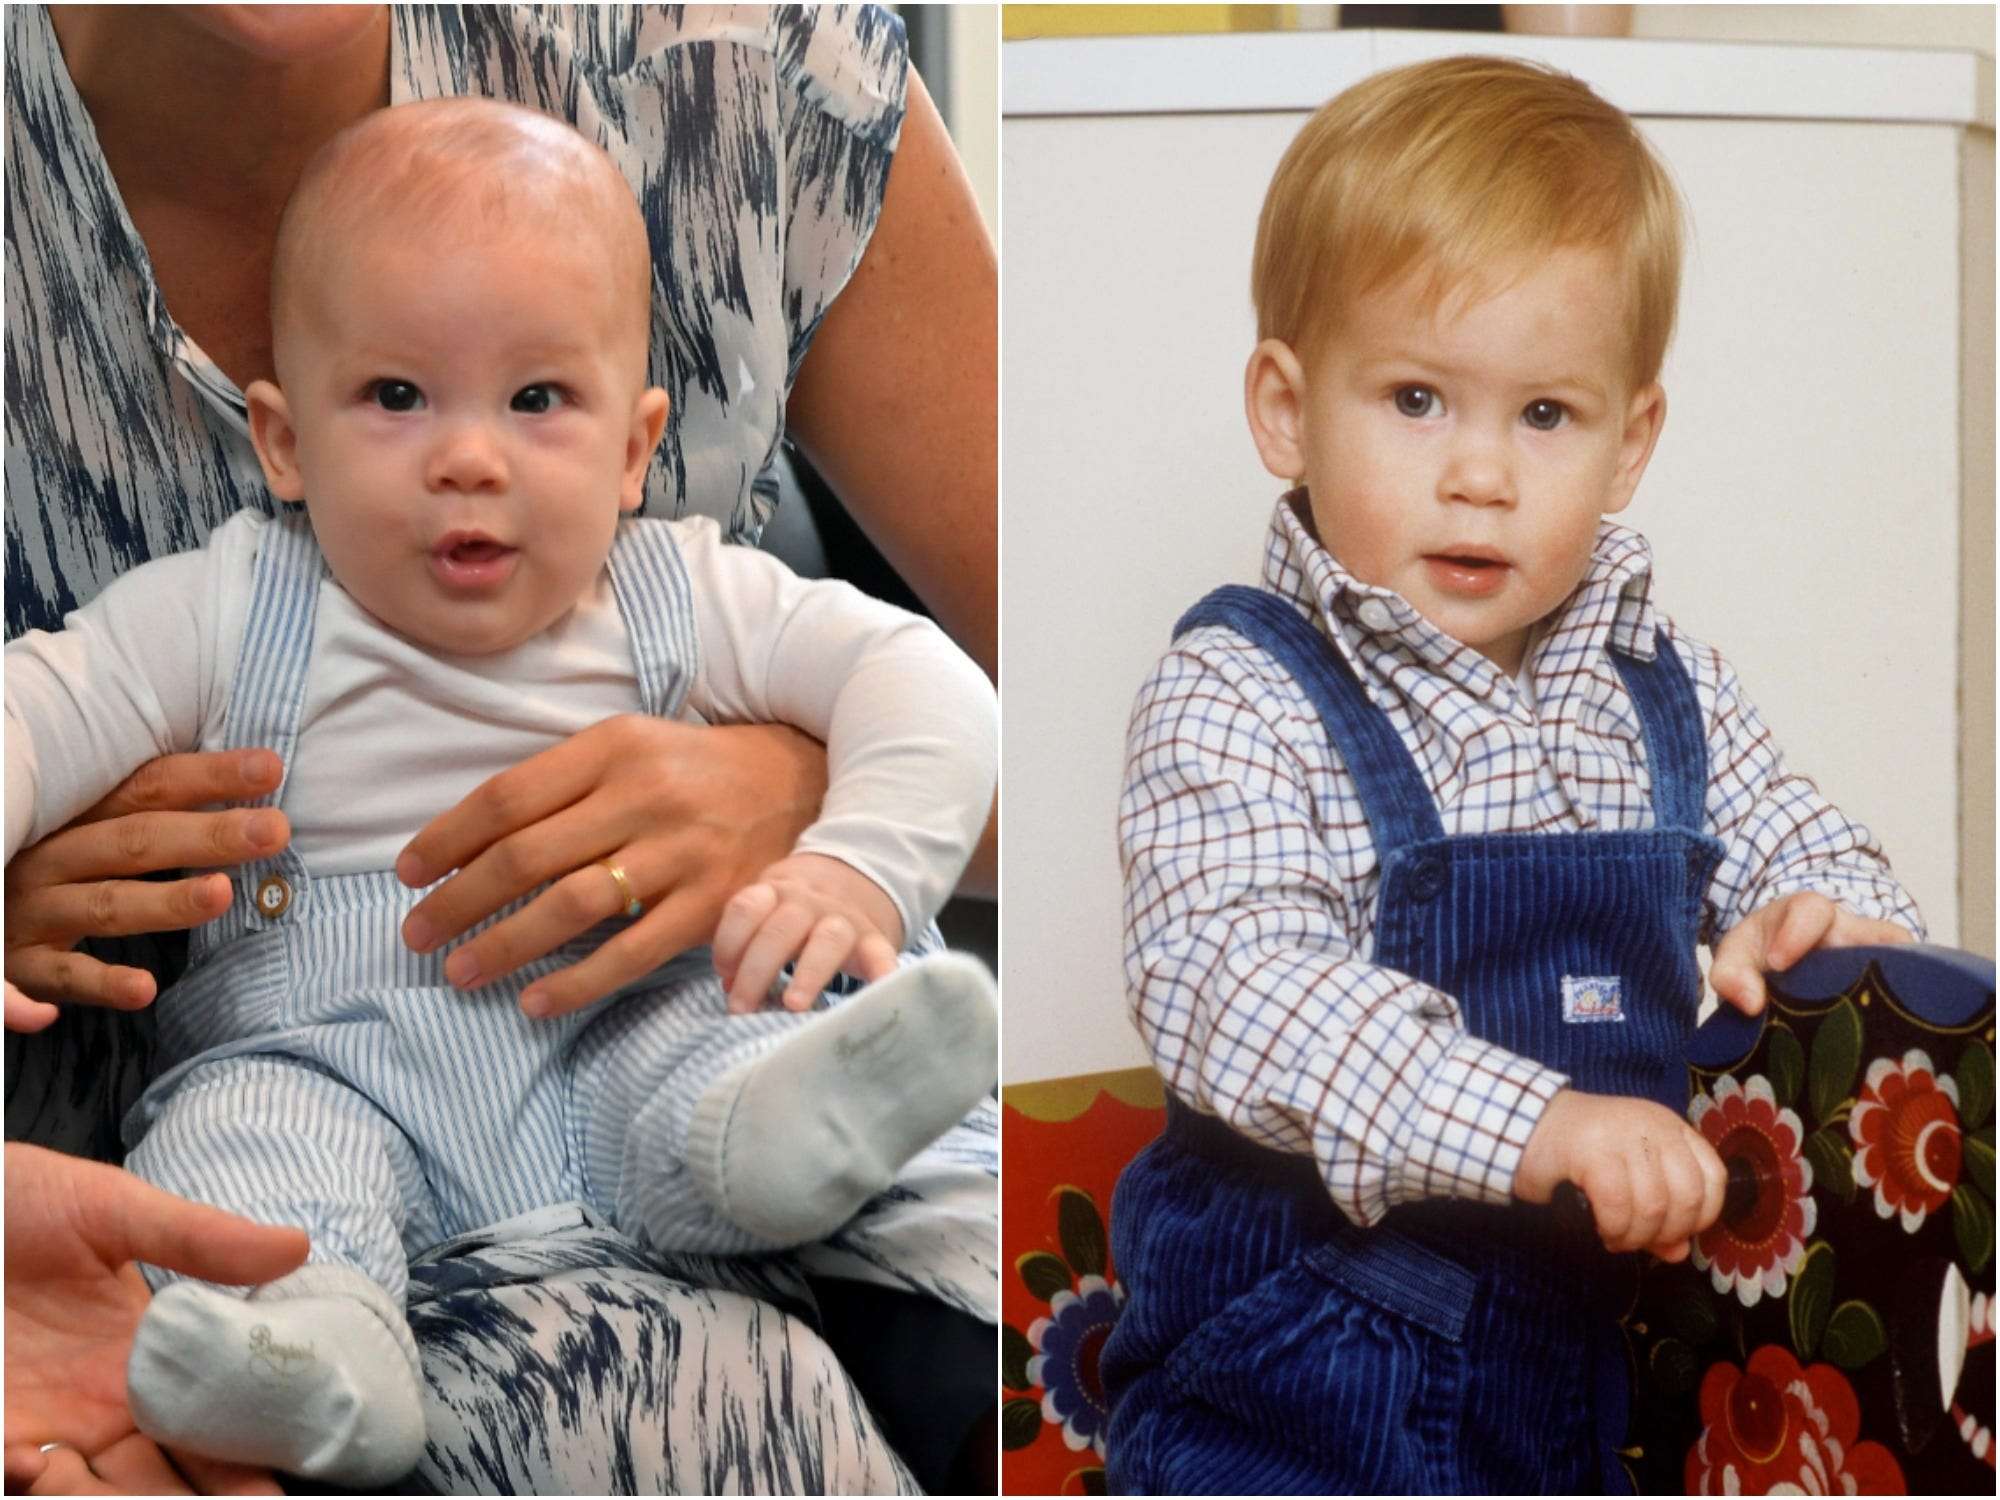 18 photos show baby Archie looks just like his dad, Prince Harry